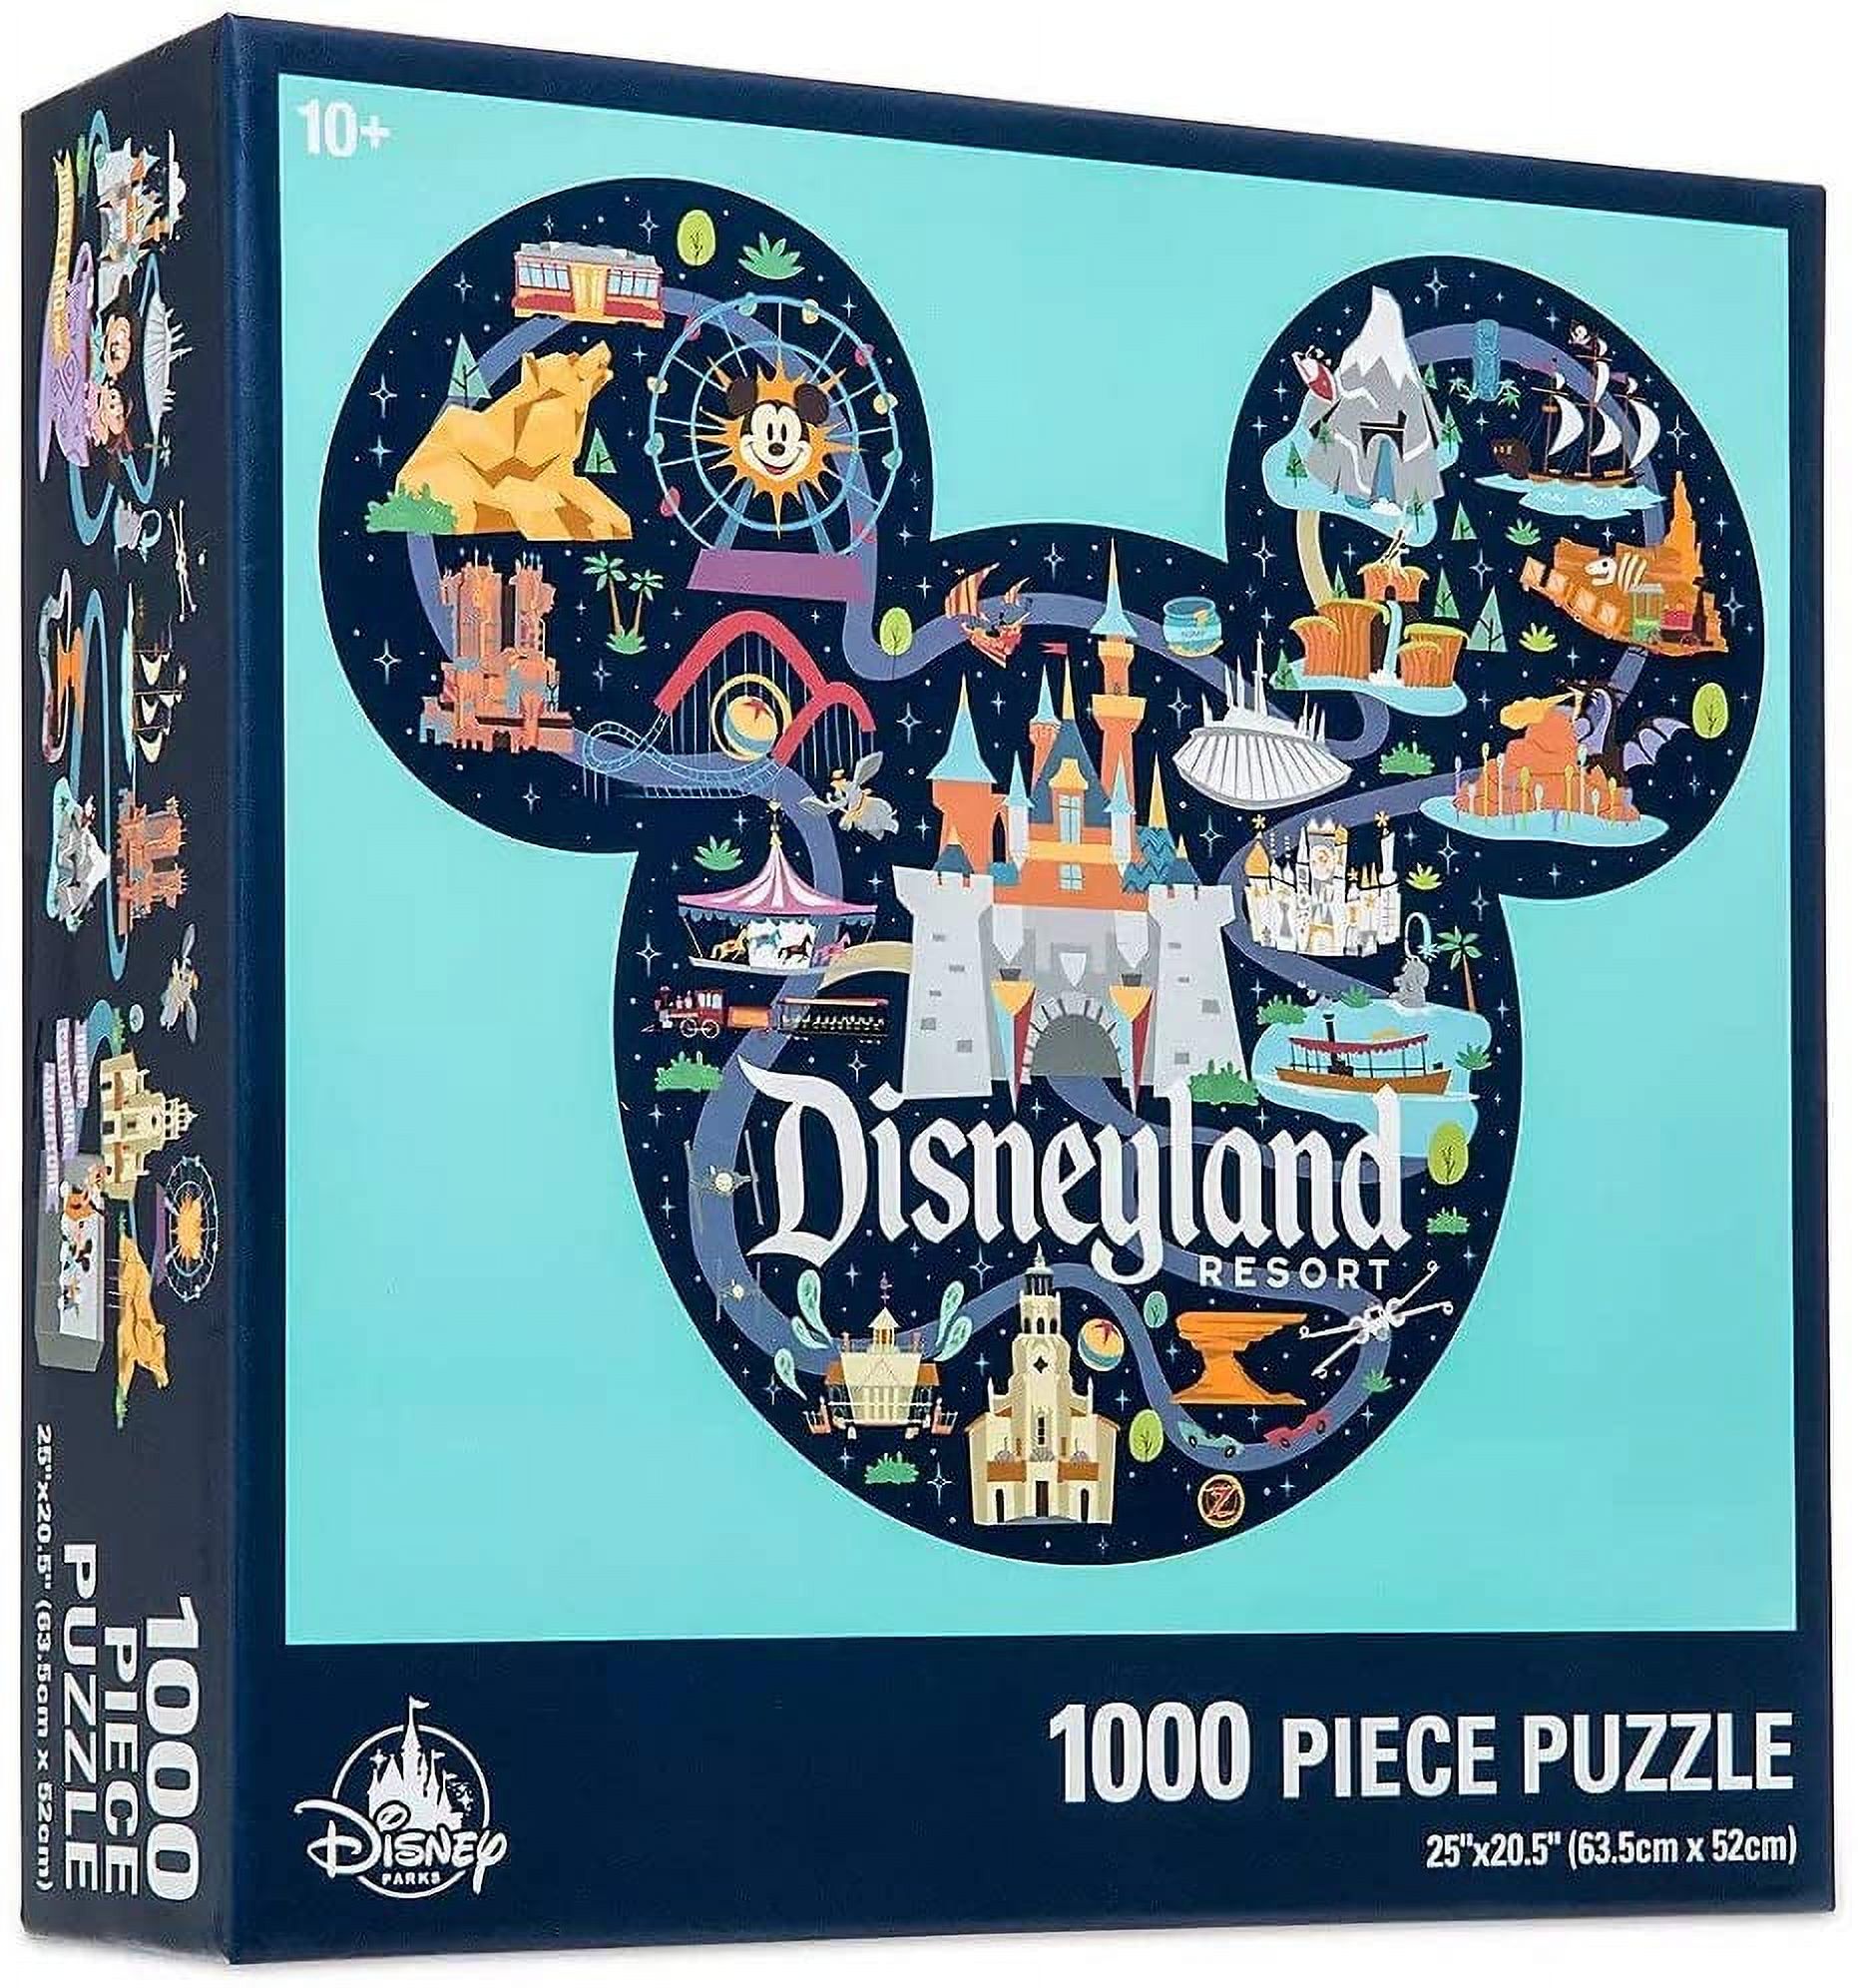 Disneyland Mickey Mouse Icon Disney Park Map Puzzle - 1000 Pieces - image 1 of 2